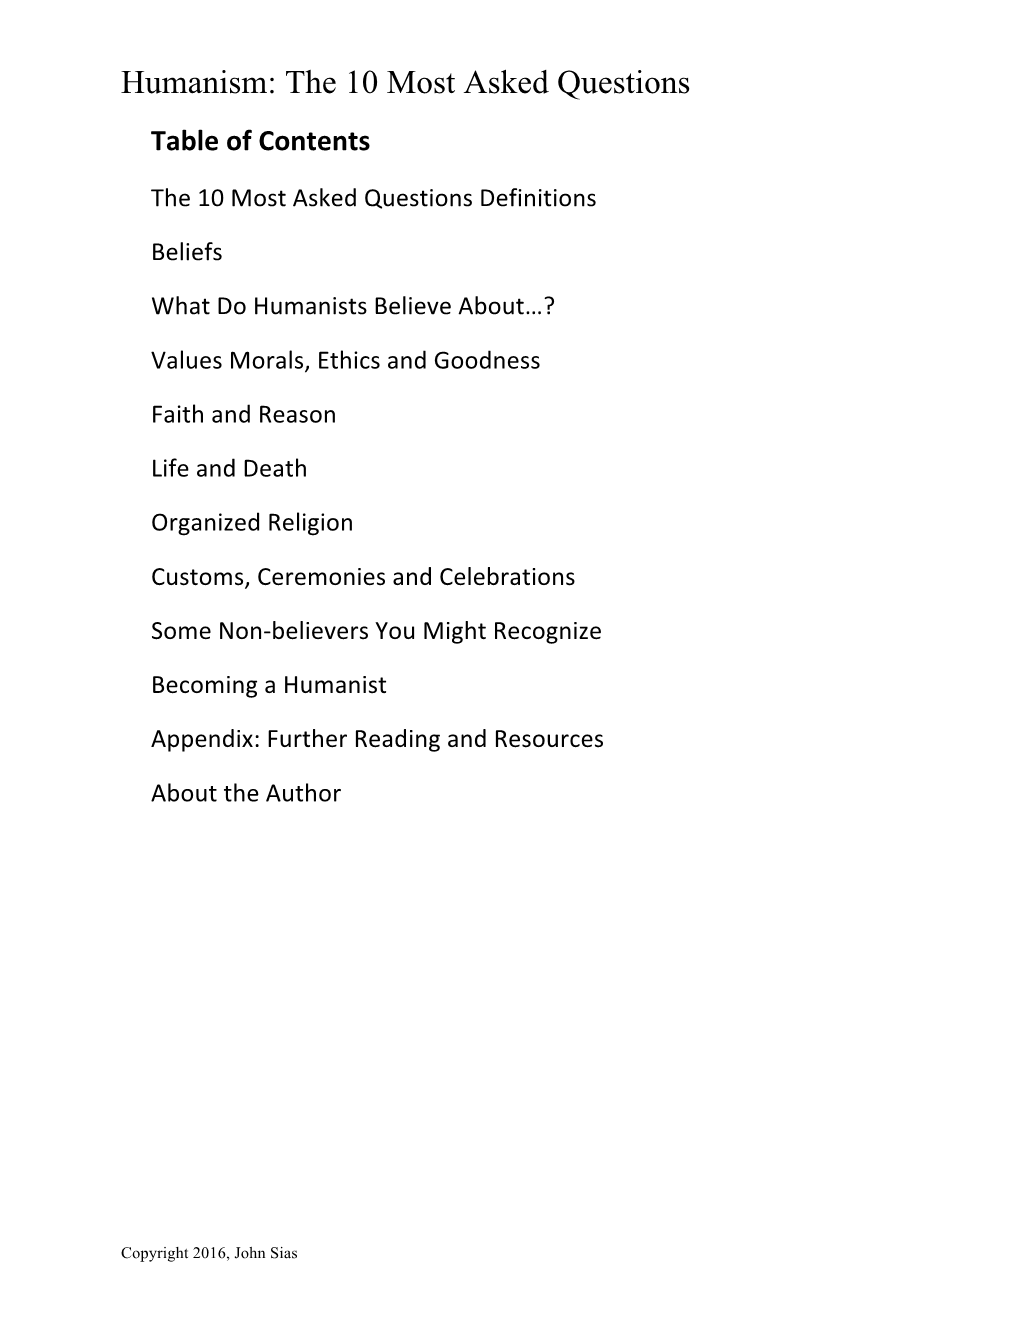 Humanism: the 10 Most Asked Questions Table of Contents